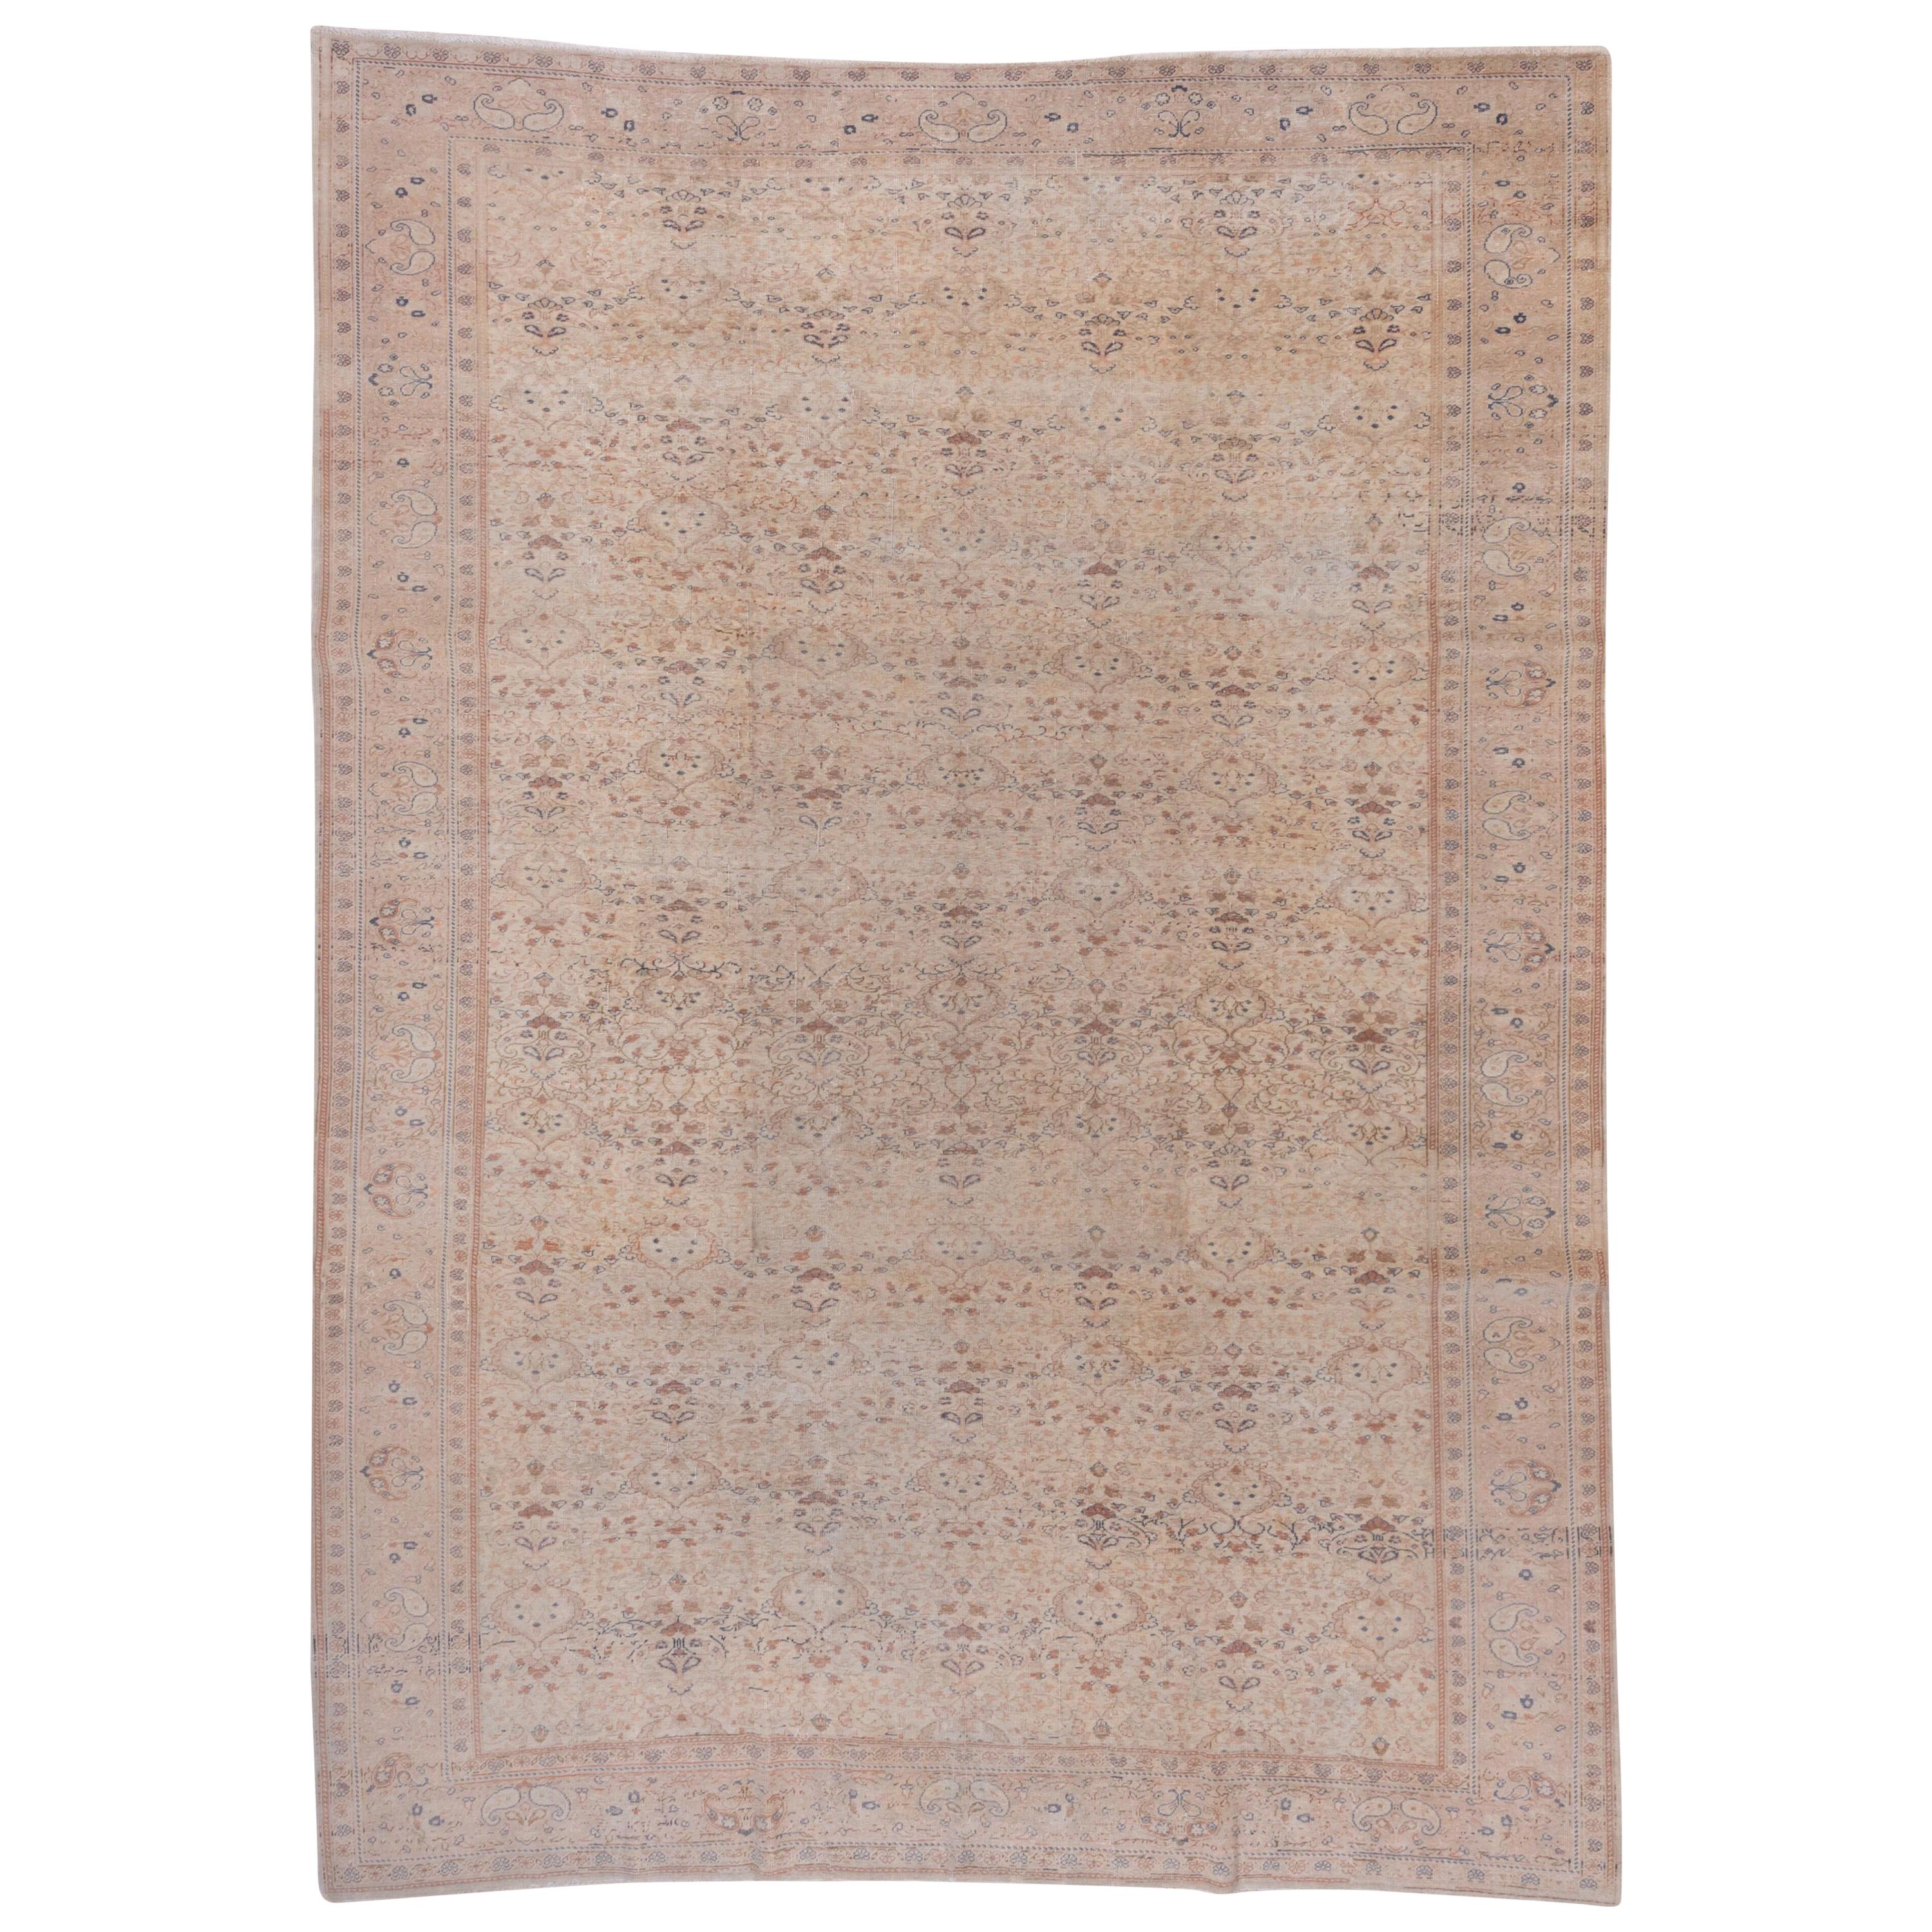 Soft Toned Turkish Oushak Rug, Blue Peach Accents, All-Over Field, circa 1930s For Sale